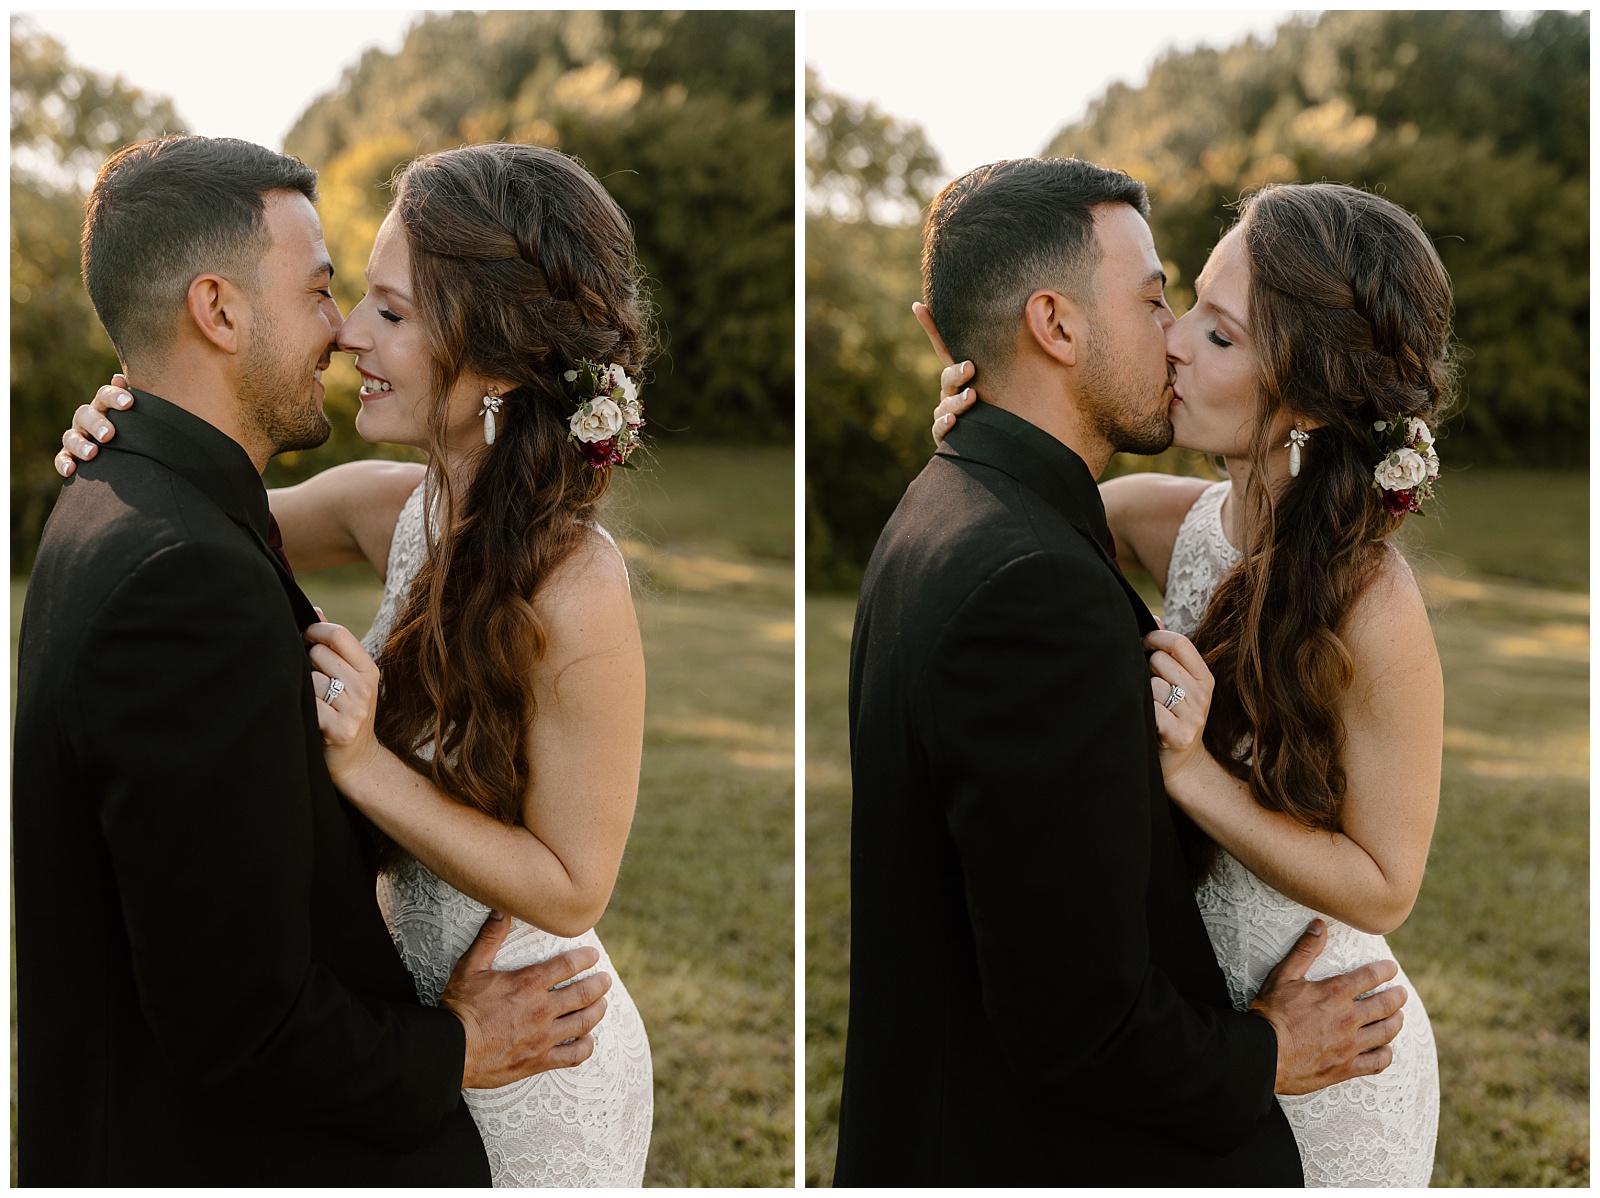 Close up romantic portrait of newlywed couple sharing a kiss.